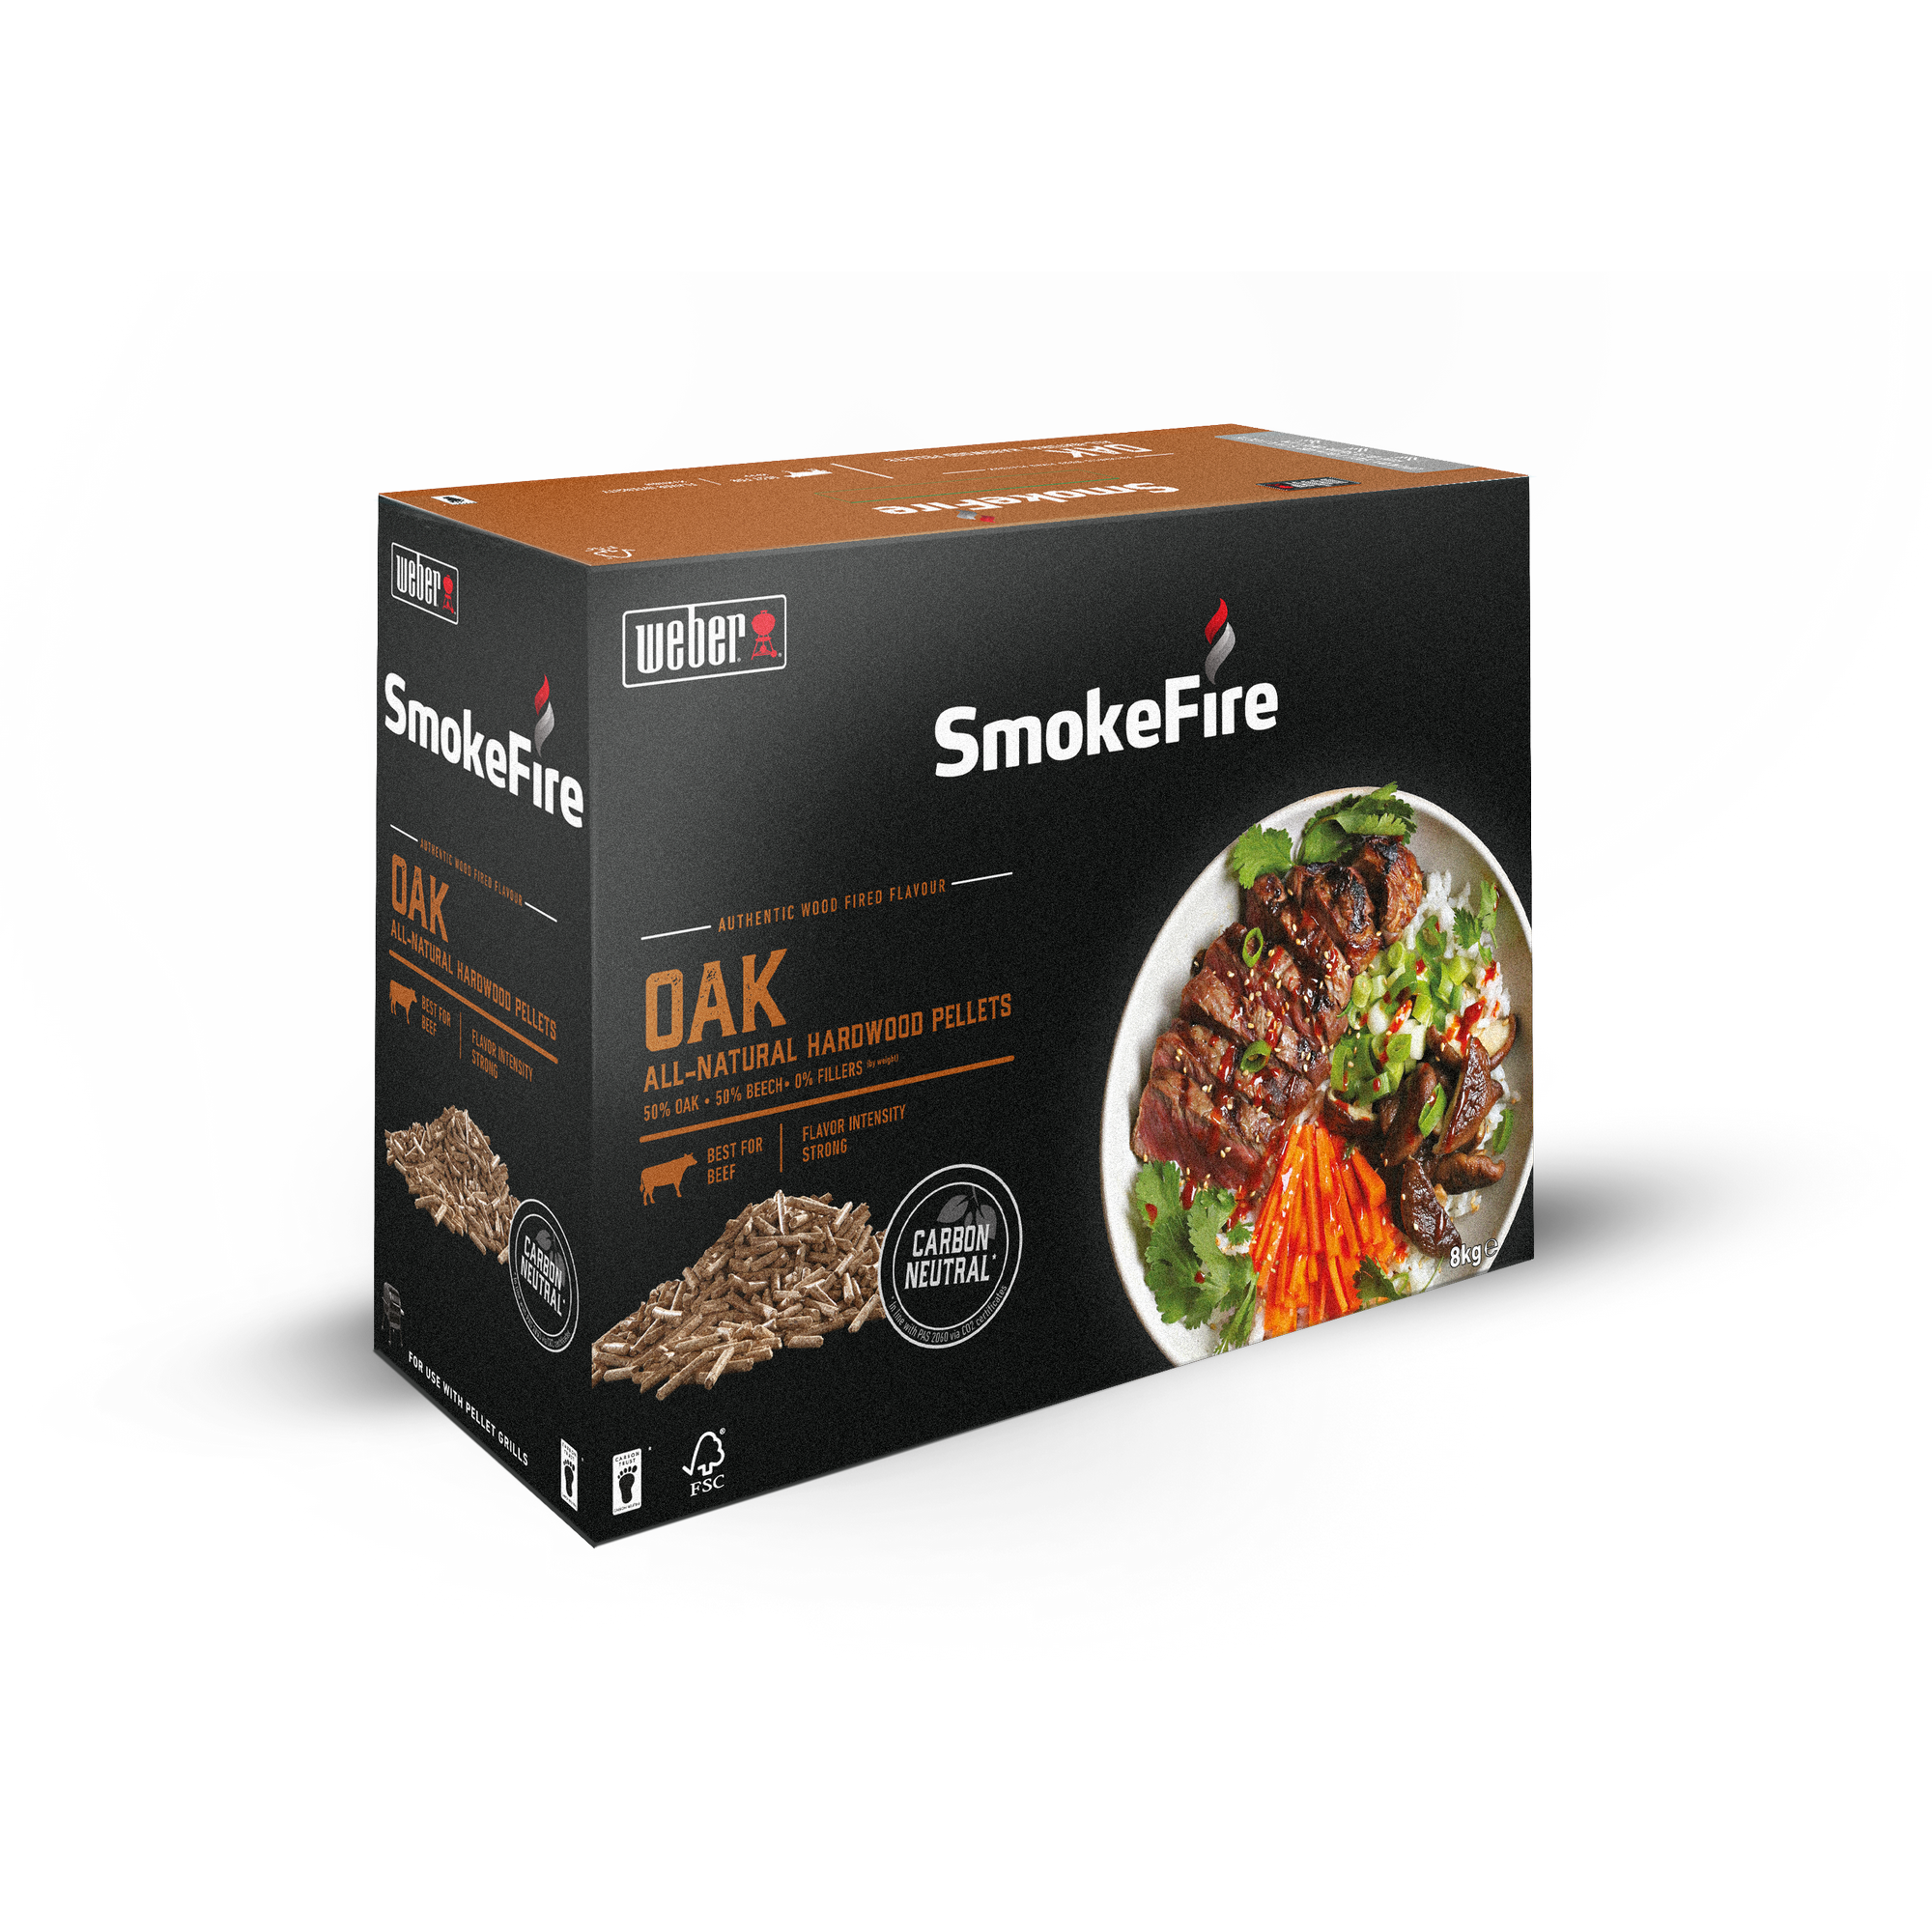 Holzpellets 'SmokeFire' Eiche 8 kg + product picture